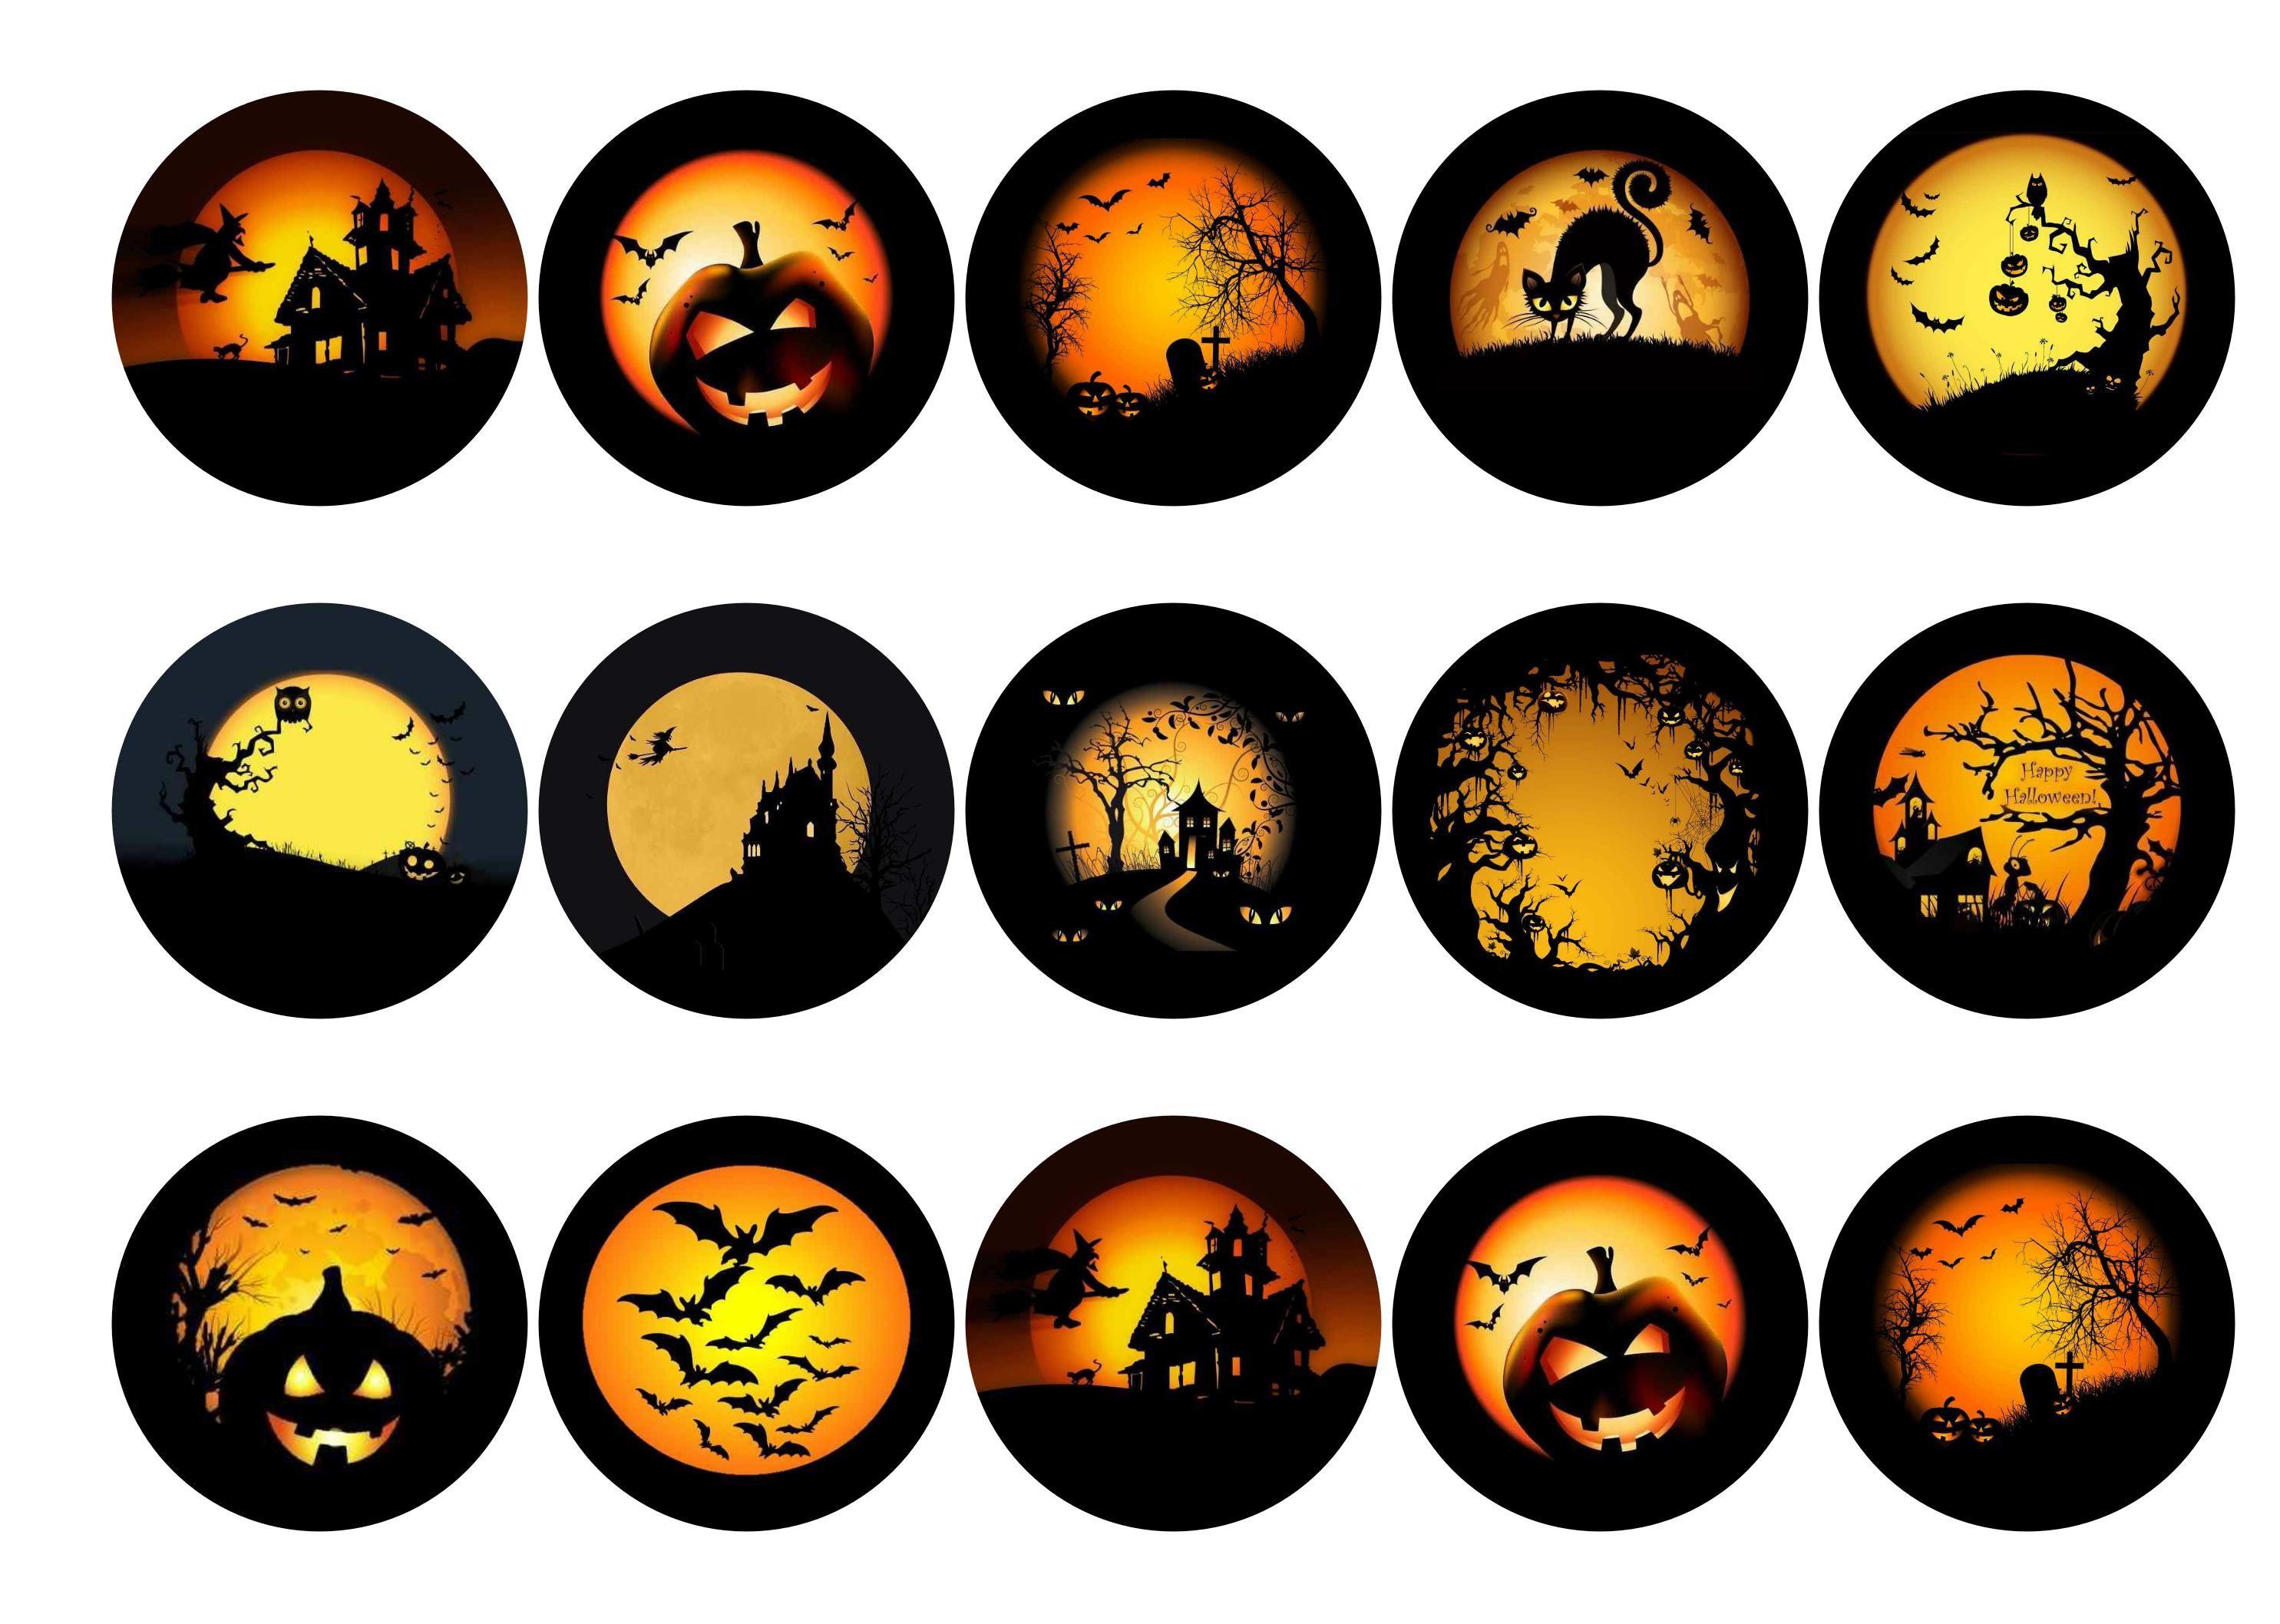 Edible printed cupcake toppers with spooky halloween images